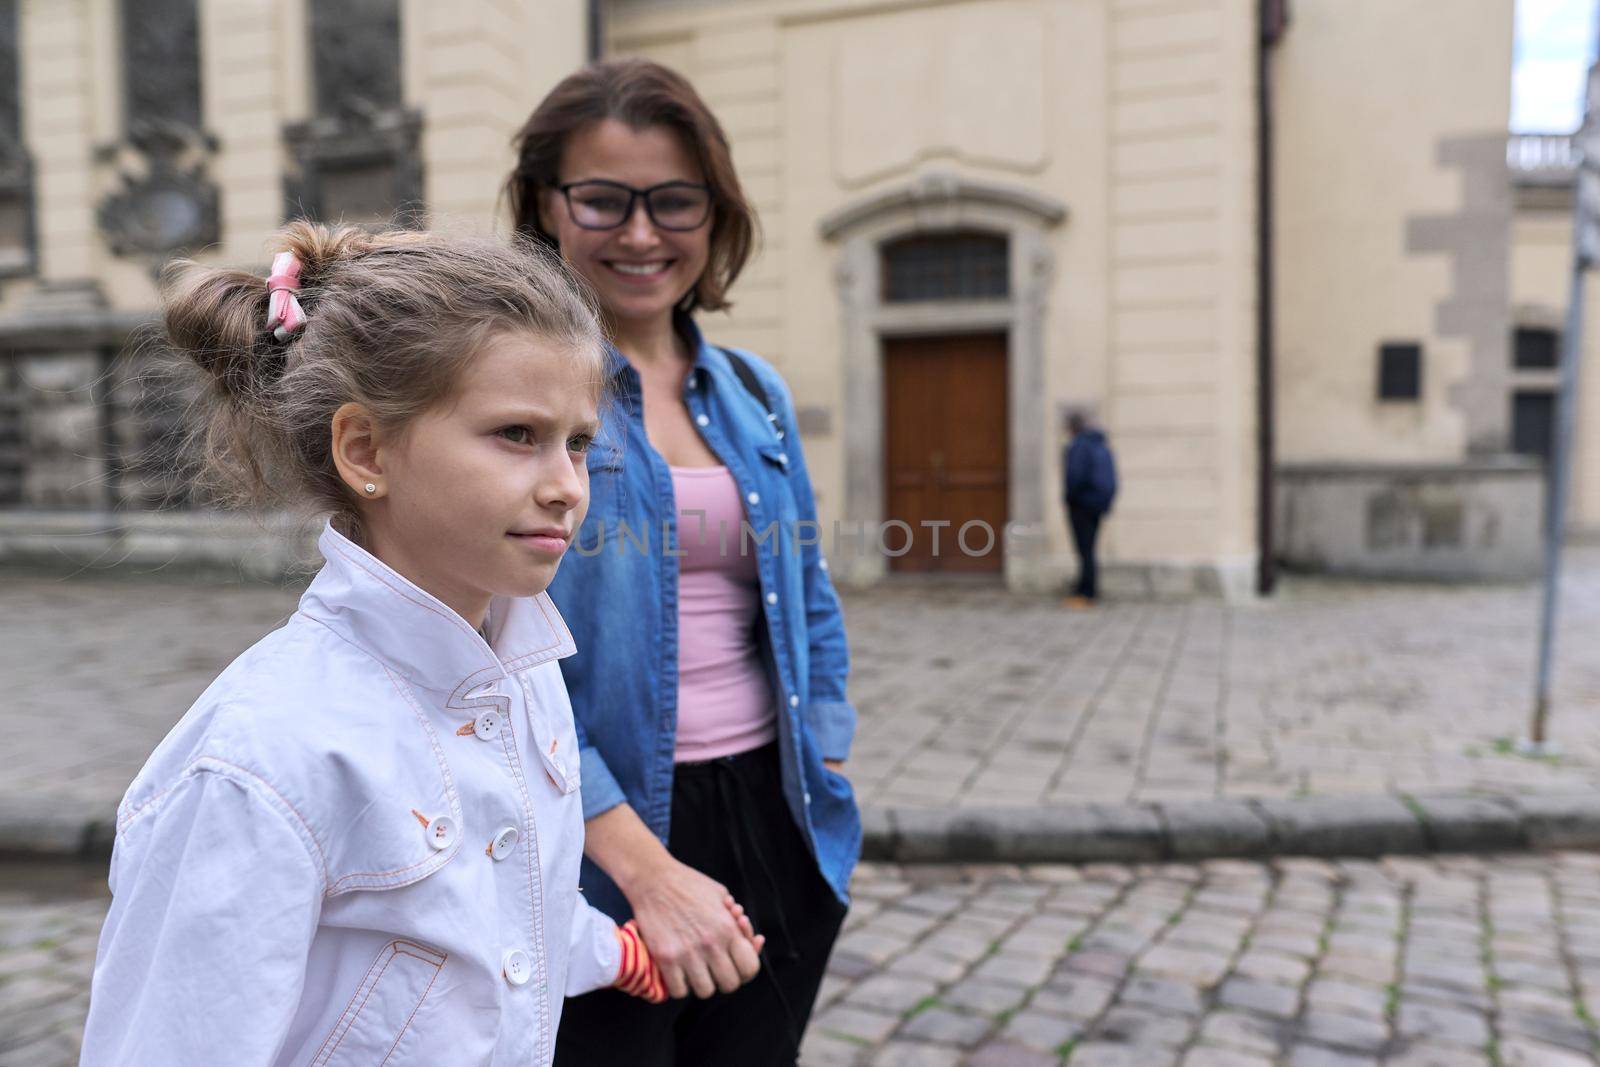 Mother and daughter child 8, 9 years old walking together along street of old city holding hands